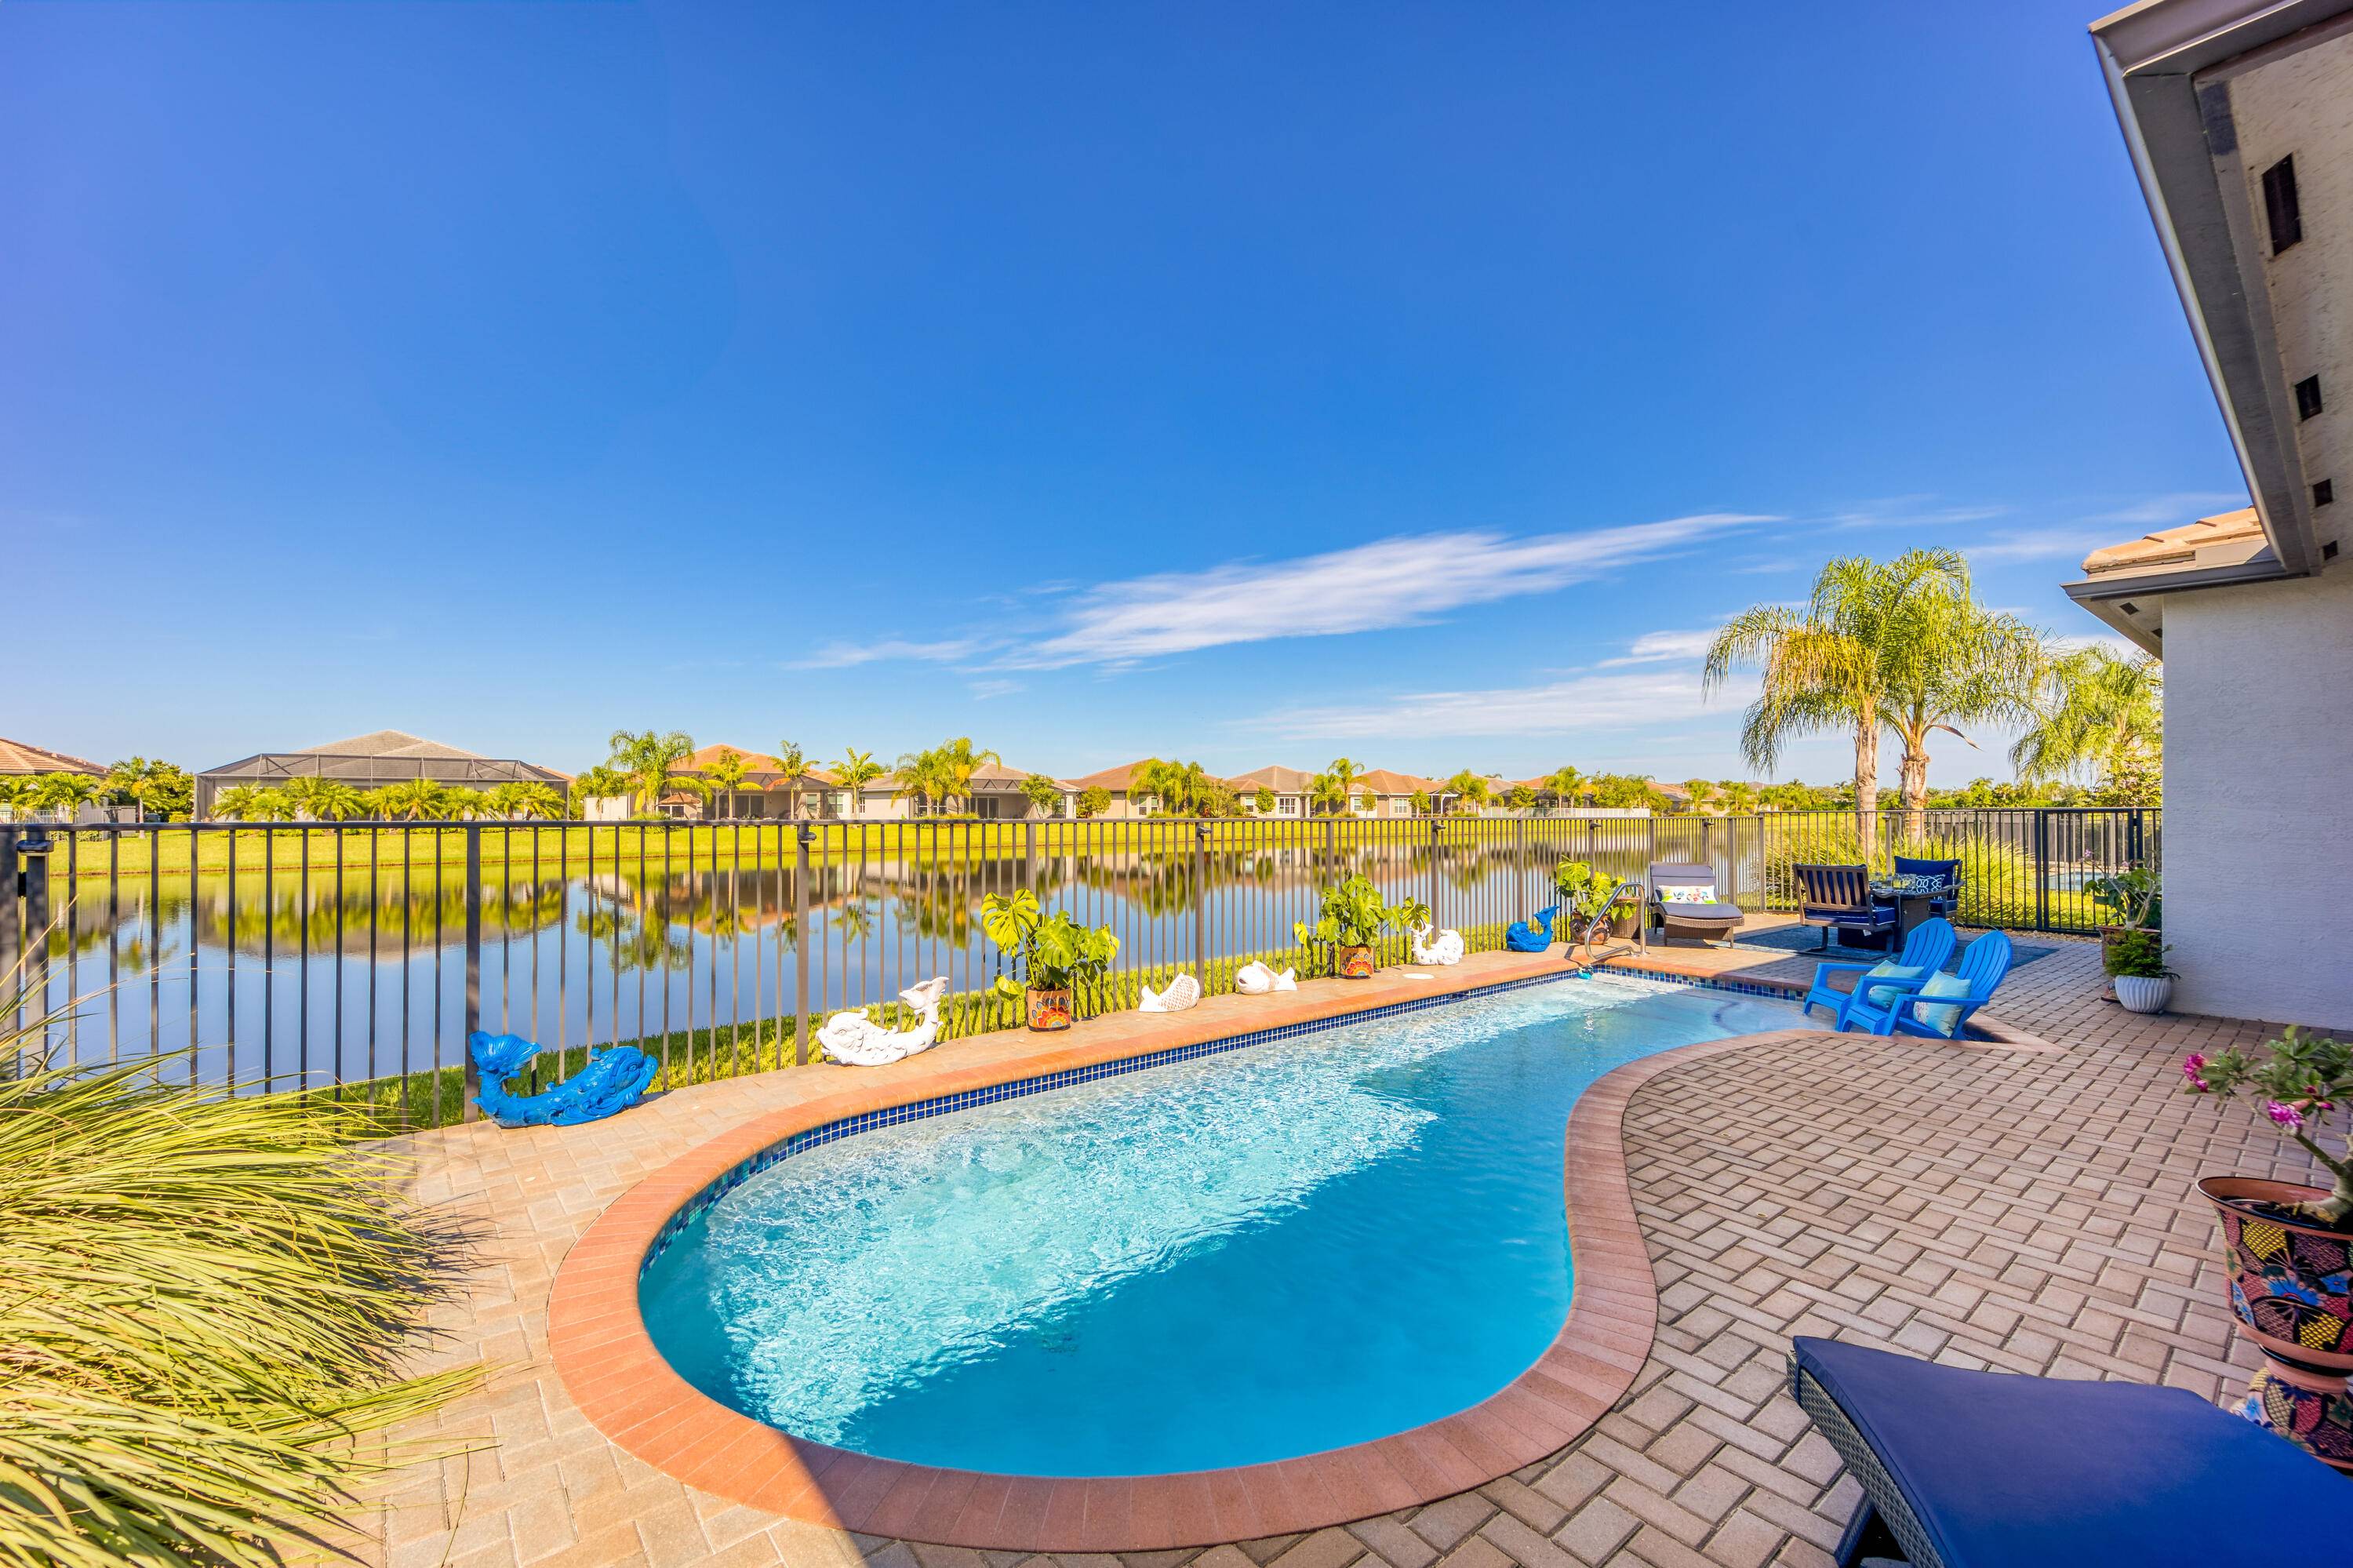 PRICE REDUCTION ! This elegant and dramatic Caroline Model in Riverland's, Valencia Cay 55 community emulates the chic Florida Coastal Design that so many people are looking for.